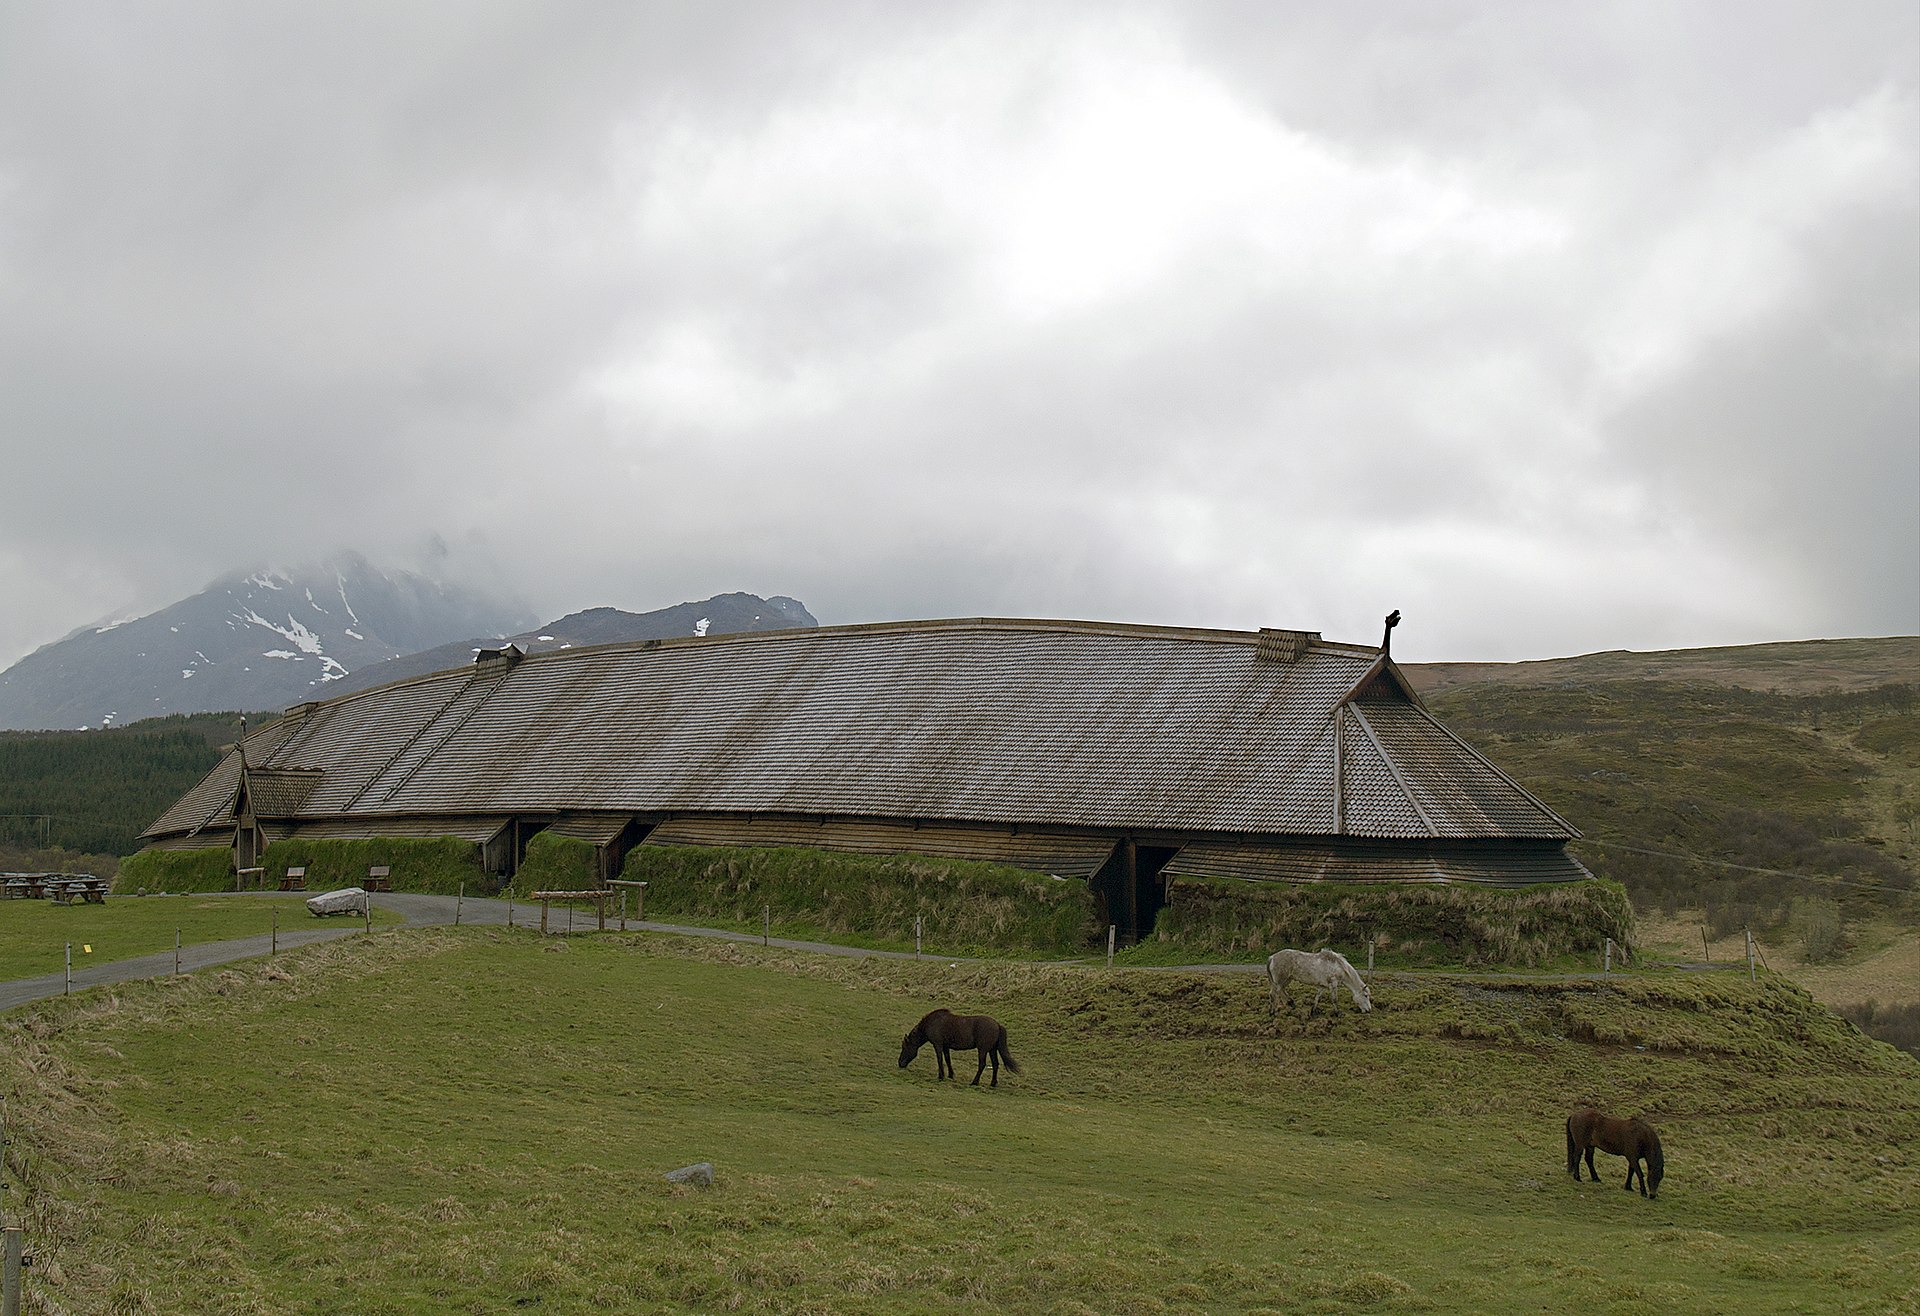 A viking long house: A long wooden structure with a sloped roof. It's in pasture with horses grazing nearby.